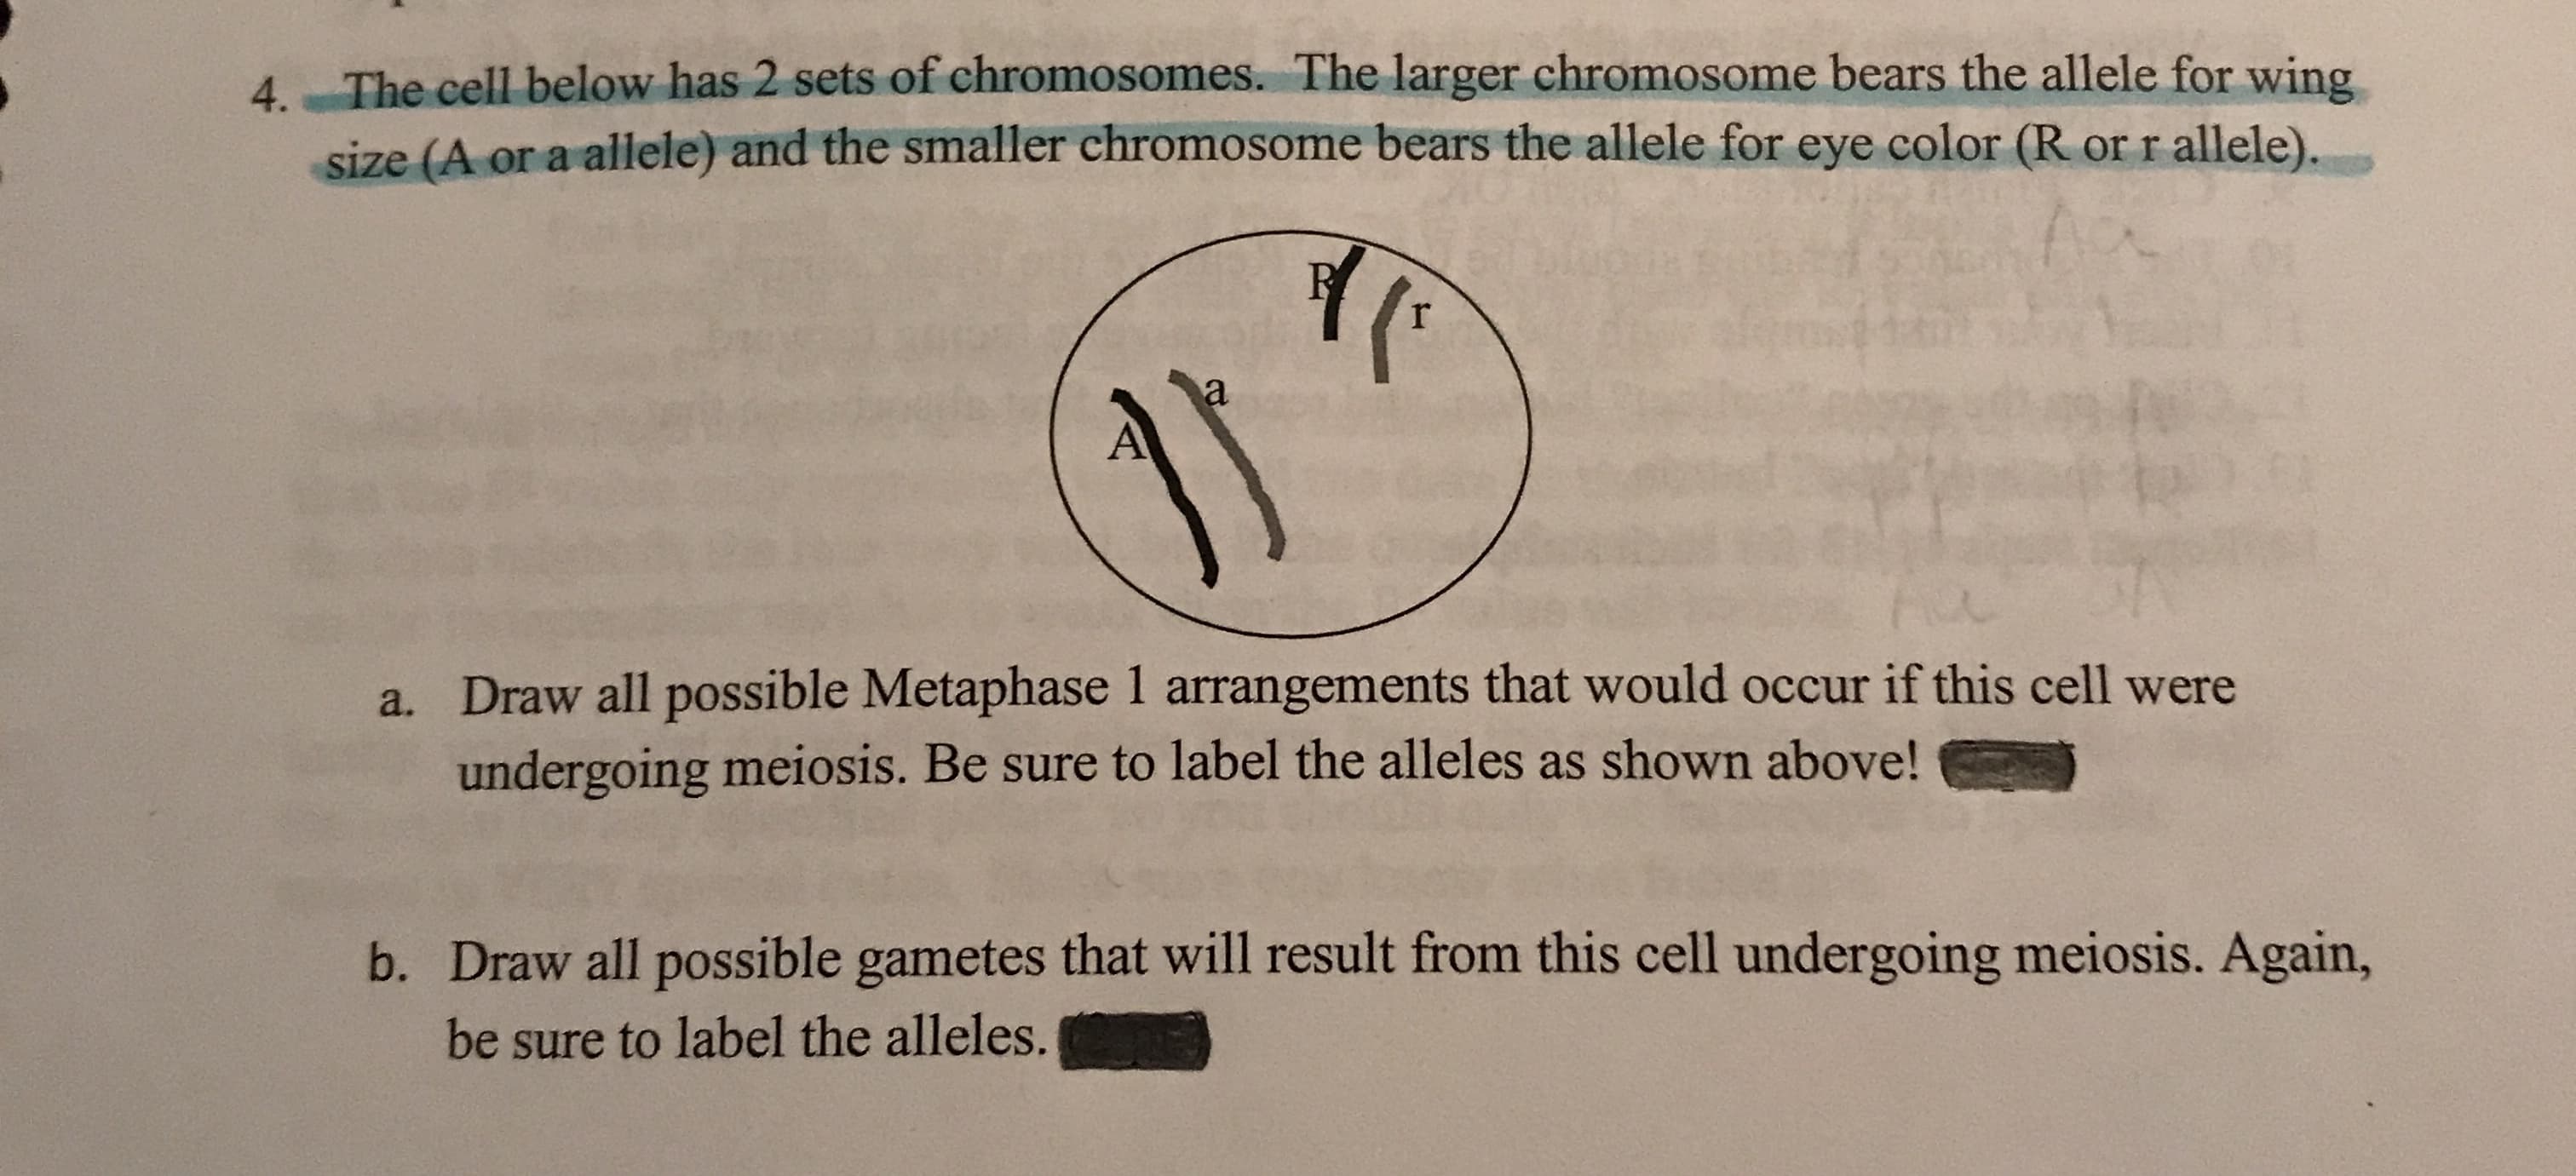 4. The cell below has 2 sets of chromosomes. The larger chromosome bears the allele for wing
size (A or a allele) and the smaller chromosome bears the allele for eye color (R
or r allele).
a
a. Draw all possible Metaphase 1 arrangements that would occur if this cell were
undergoing meiosis. Be sure to label the alleles as shown above!
b. Draw all possible gametes that will result from this cell undergoing meiosis. Again,
be sure to label the alleles.
